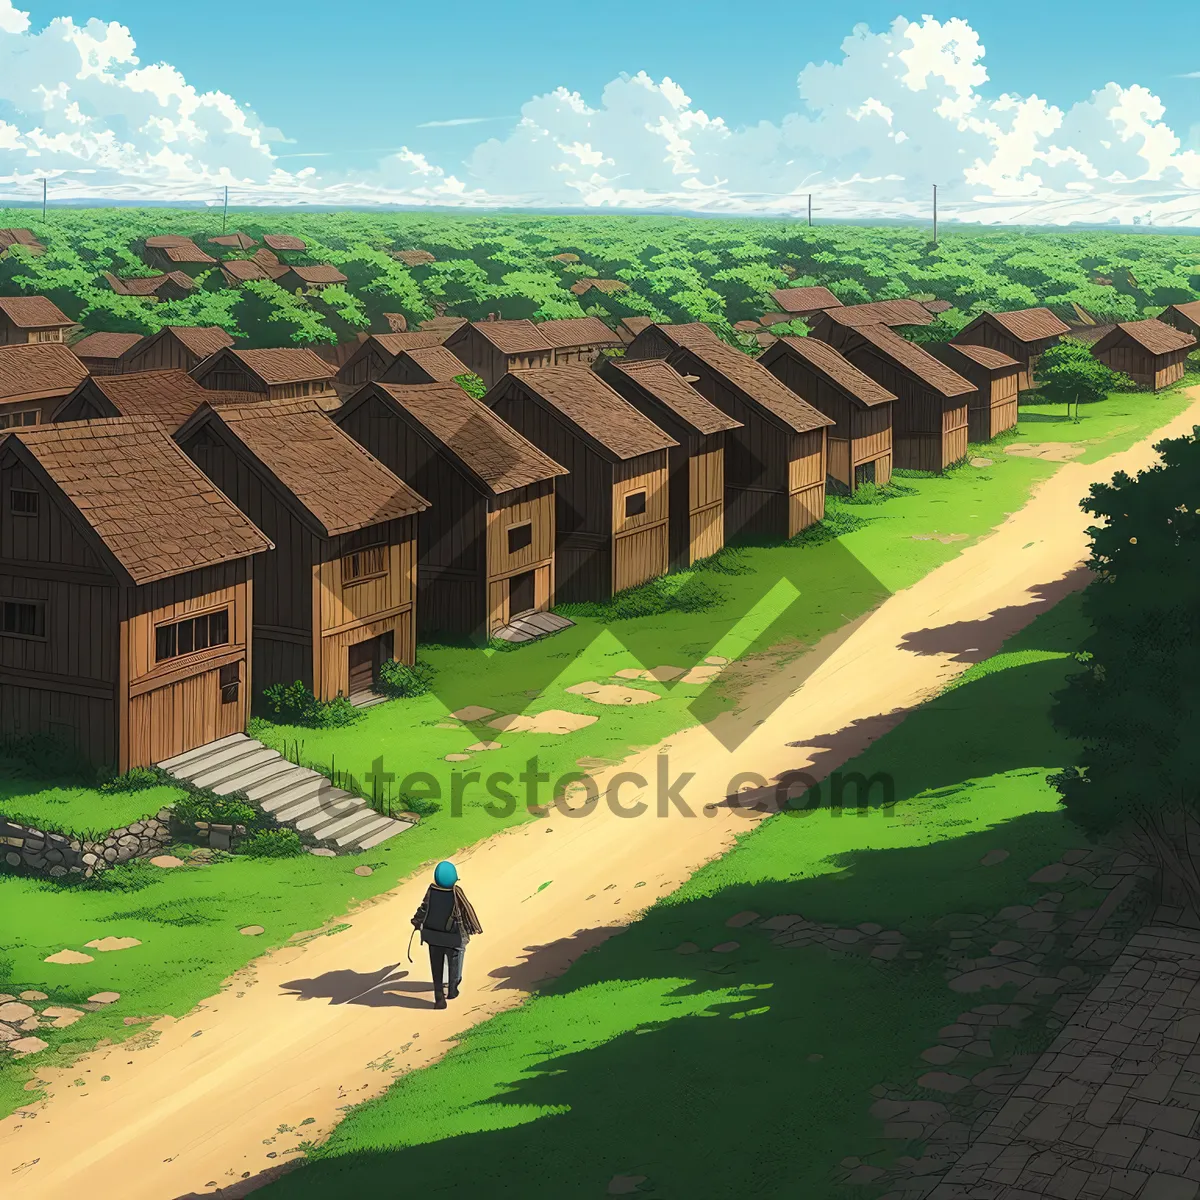 Picture of Rustic Home with Beautiful Tile Roof Amidst Serene Landscape